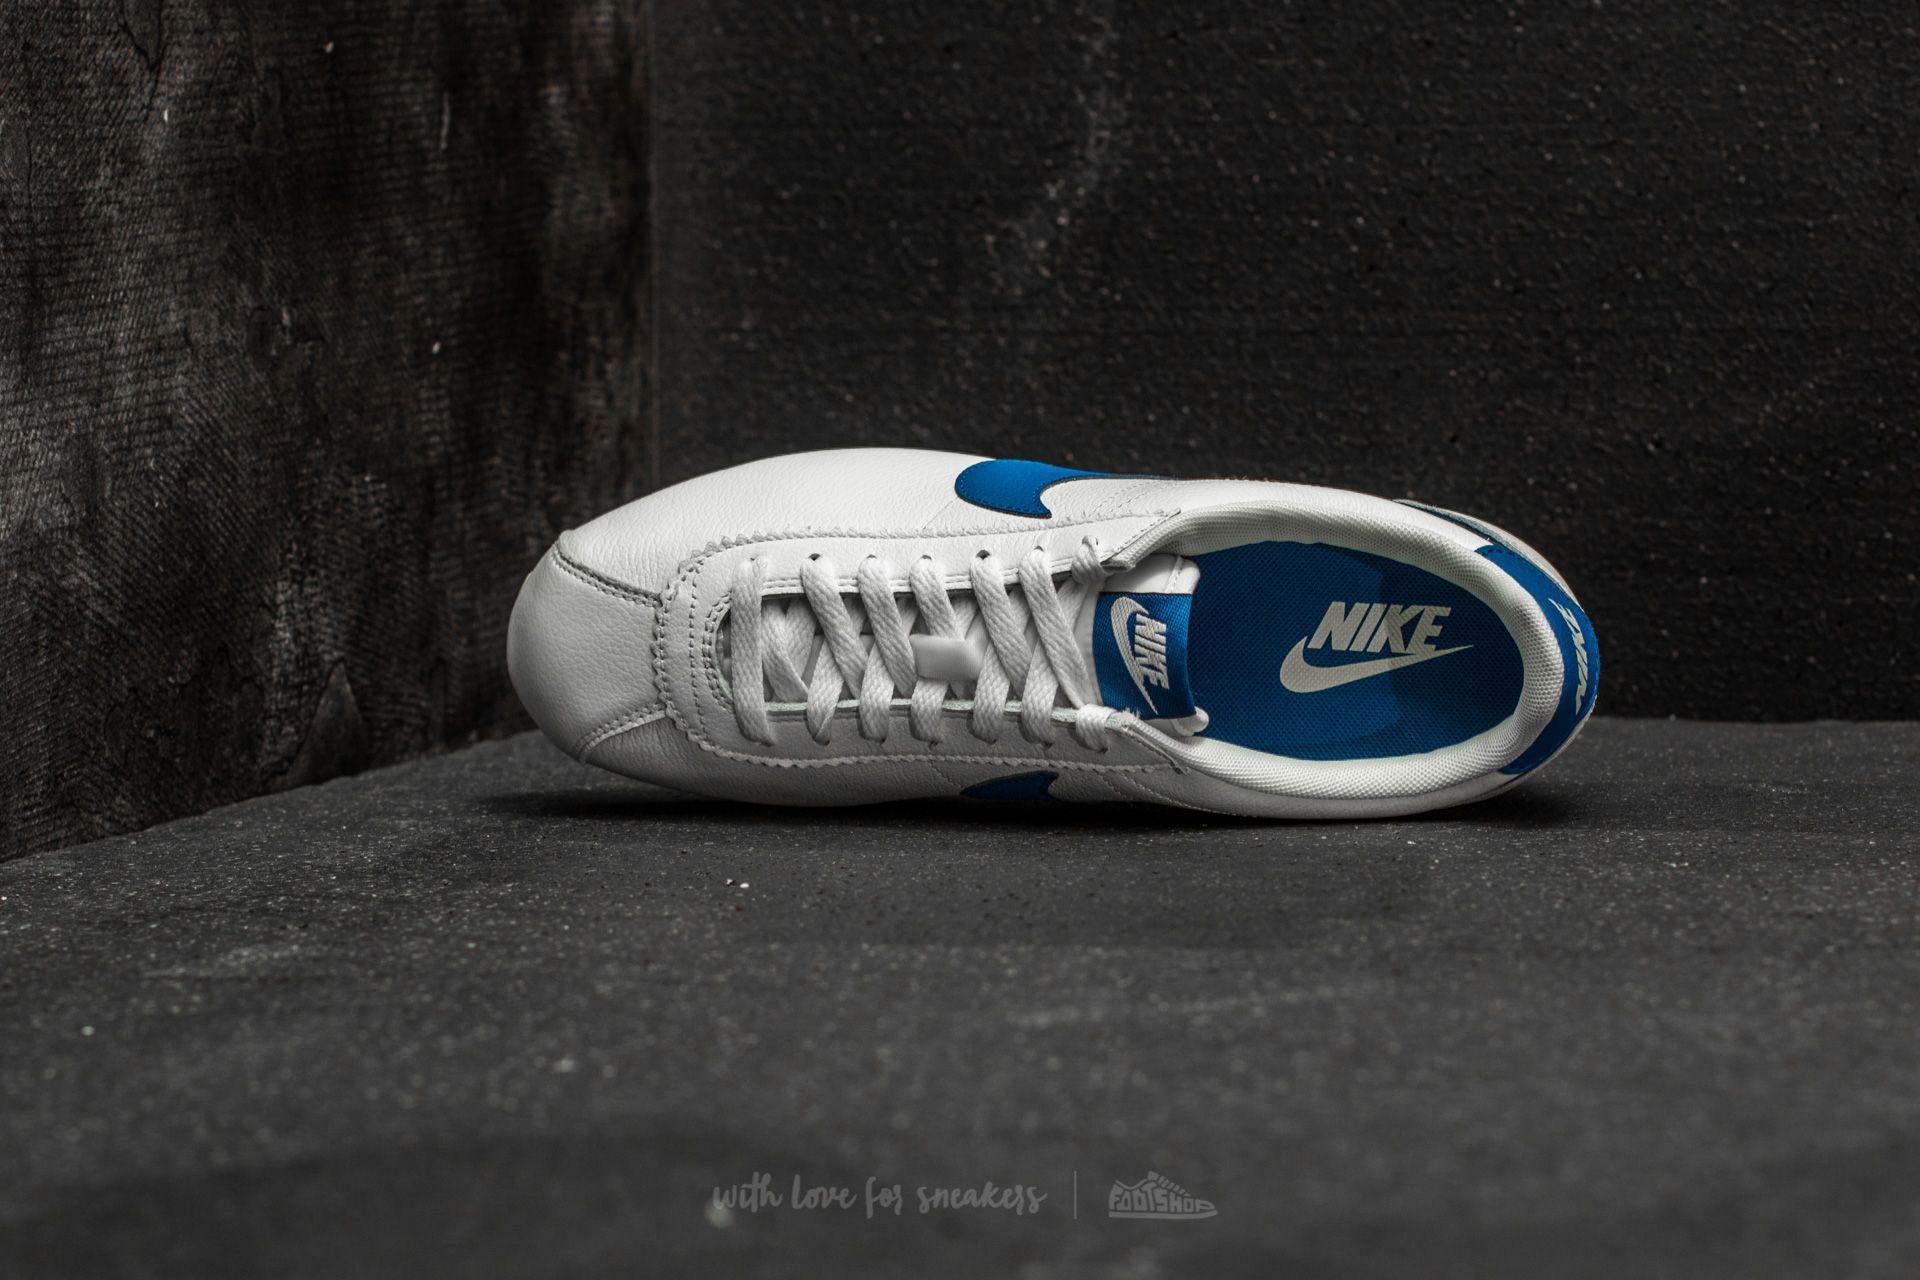 Nike Classic Cortez Leather Se Sail/ Blue Jay for Men | Lyst